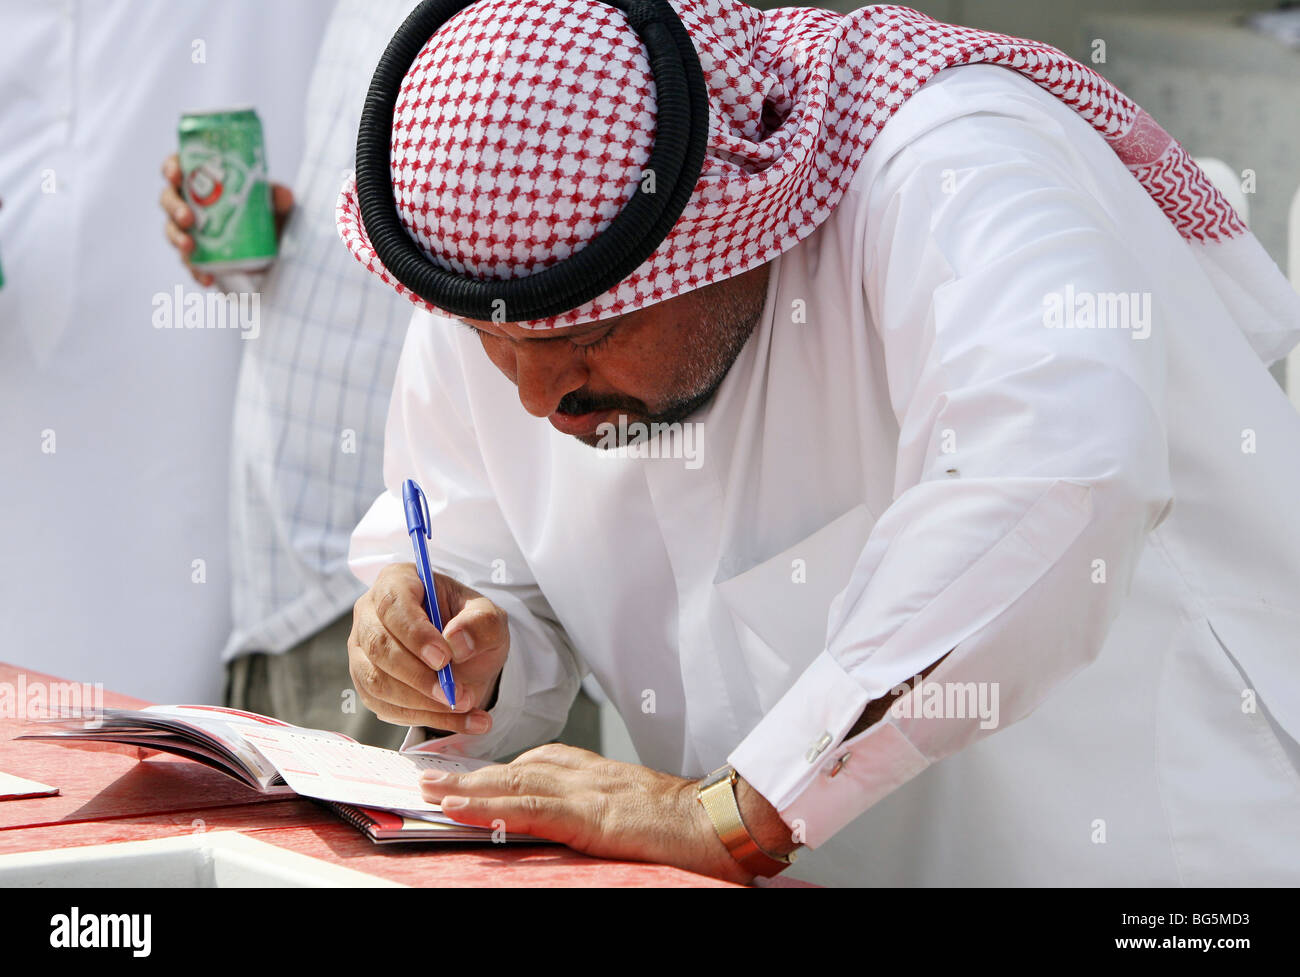 A man filling out a bet ticket, Dubai, United Arab Emirates Stock Photo